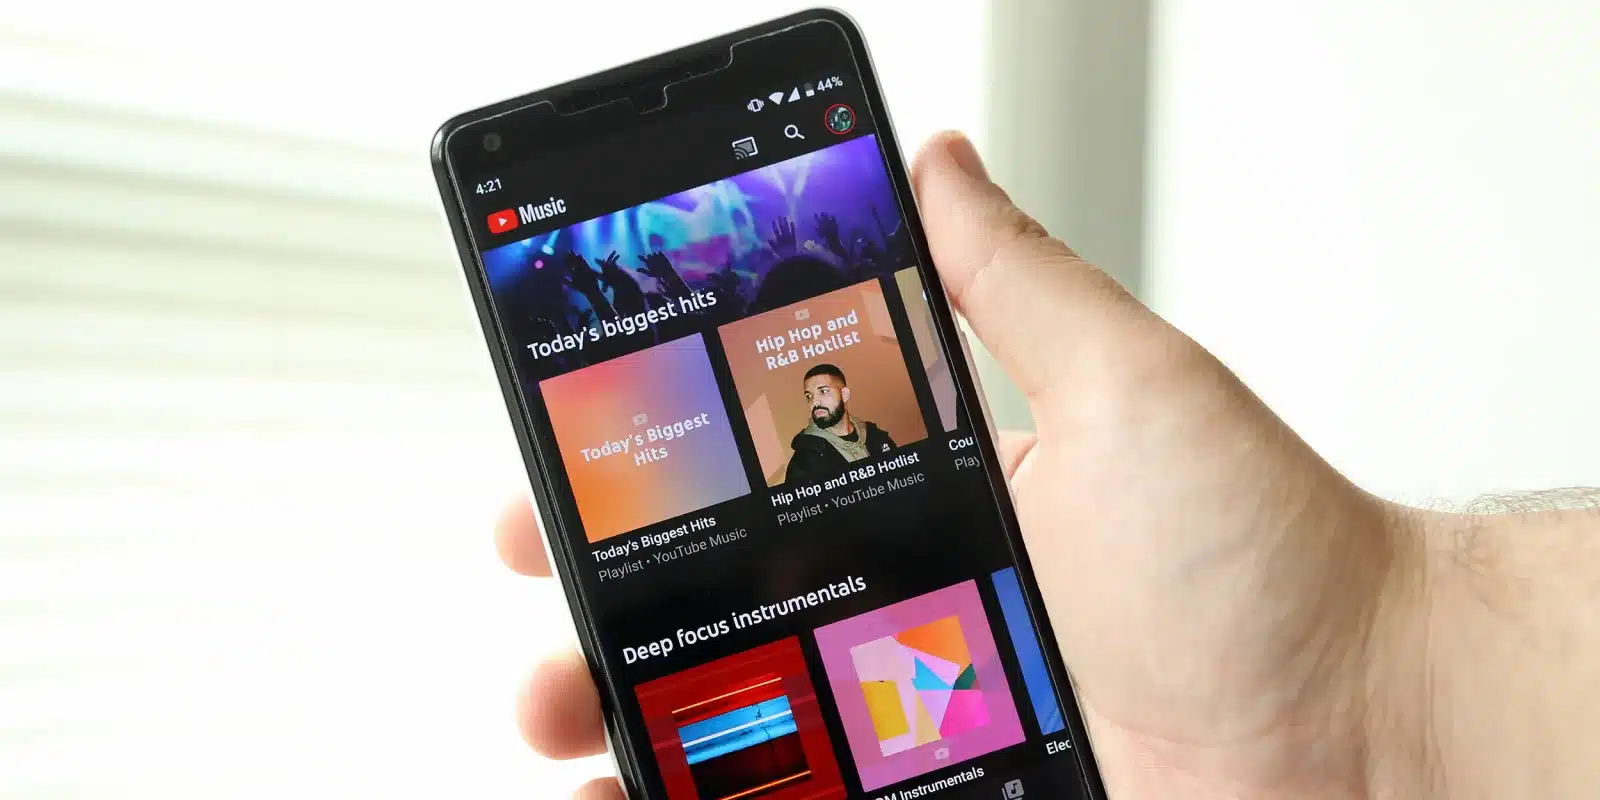 YT Music App Review: Exploring the Functions, Design, User Experience, And Usability